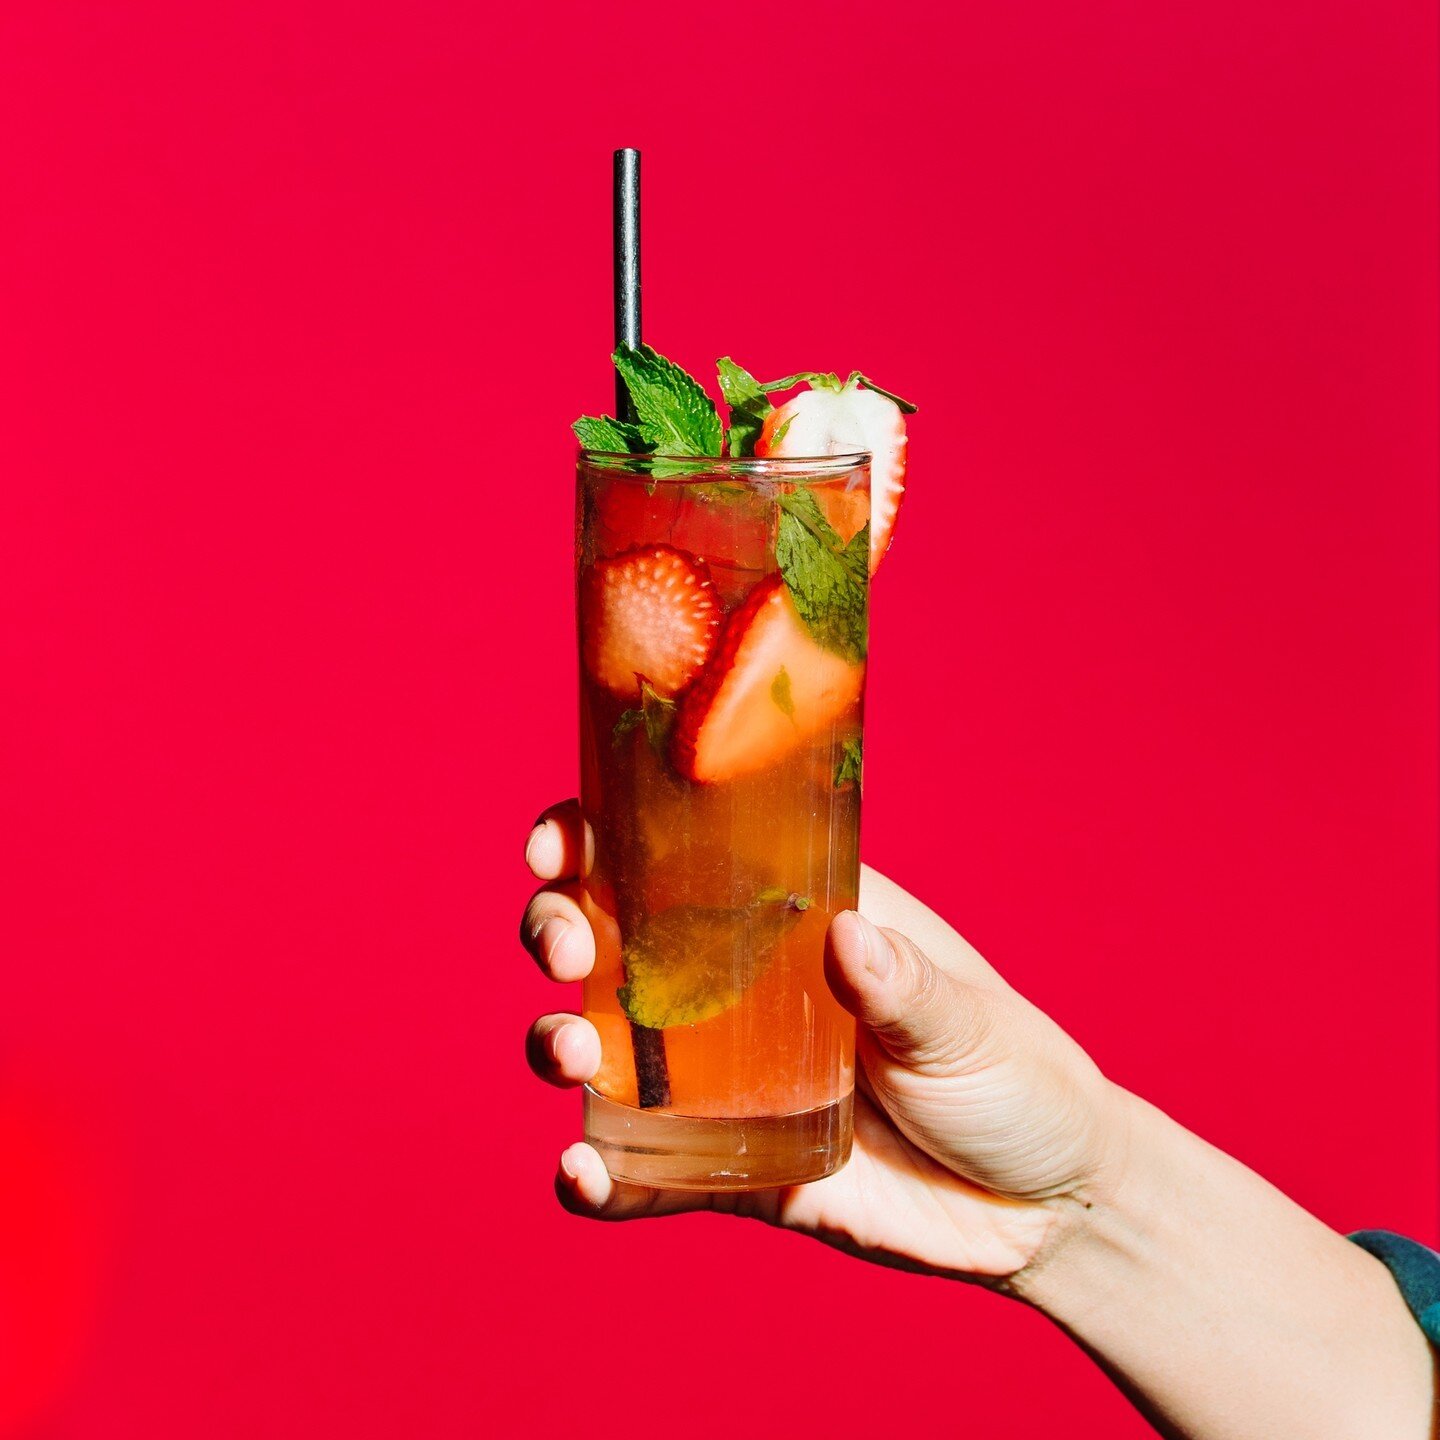 Looking for a refreshing and luxurious way to savor the season? Look no further than our *𝘯𝘦𝘸* 𝐒𝐭𝐫𝐚𝐰𝐛𝐞𝐫𝐫𝐲 𝐌𝐨𝐣𝐢𝐭𝐨!⁣⁠
⁣⁠
This classic cocktail gets a modern twist with fresh strawberries, mint, lime, and our ultra-premium Port of Ent